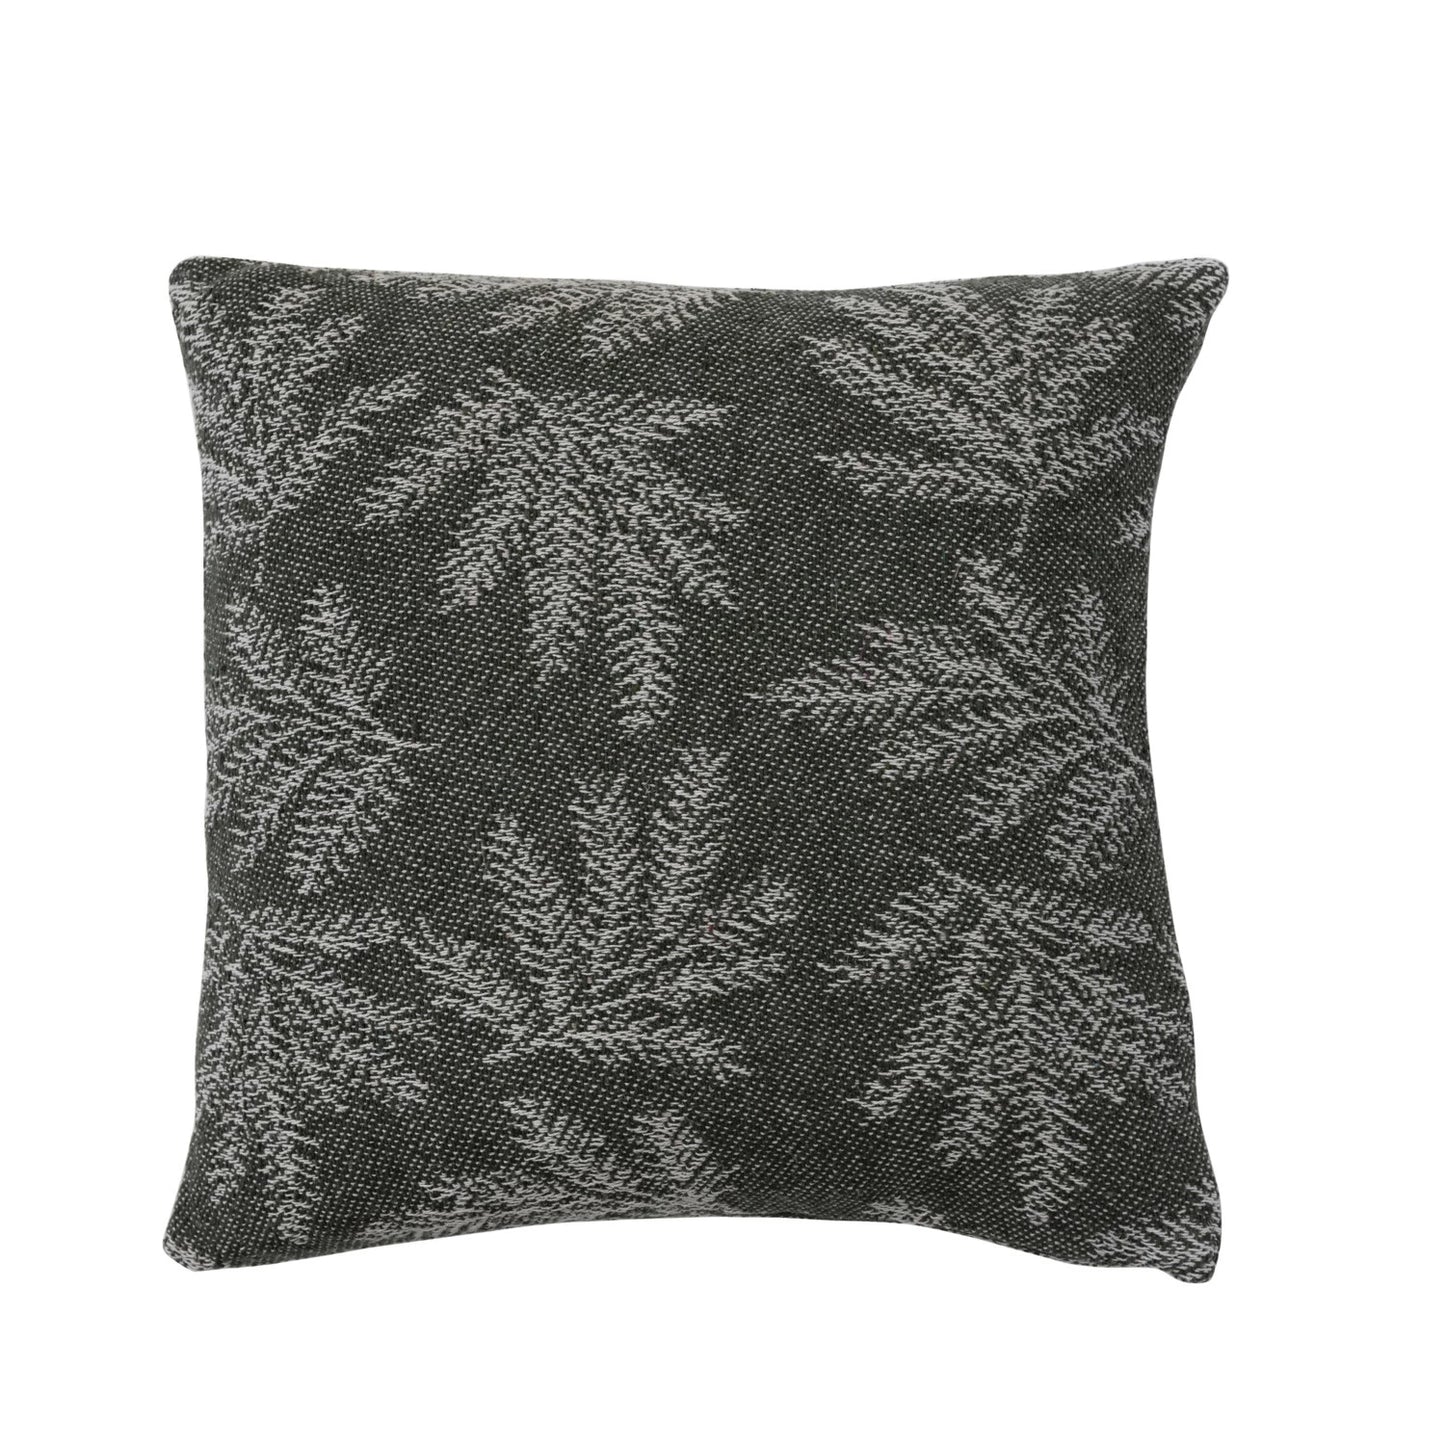 18" Square Woven Recycled Cotton Pillow w/ Pine Needles Pattern, Green & Cream Color